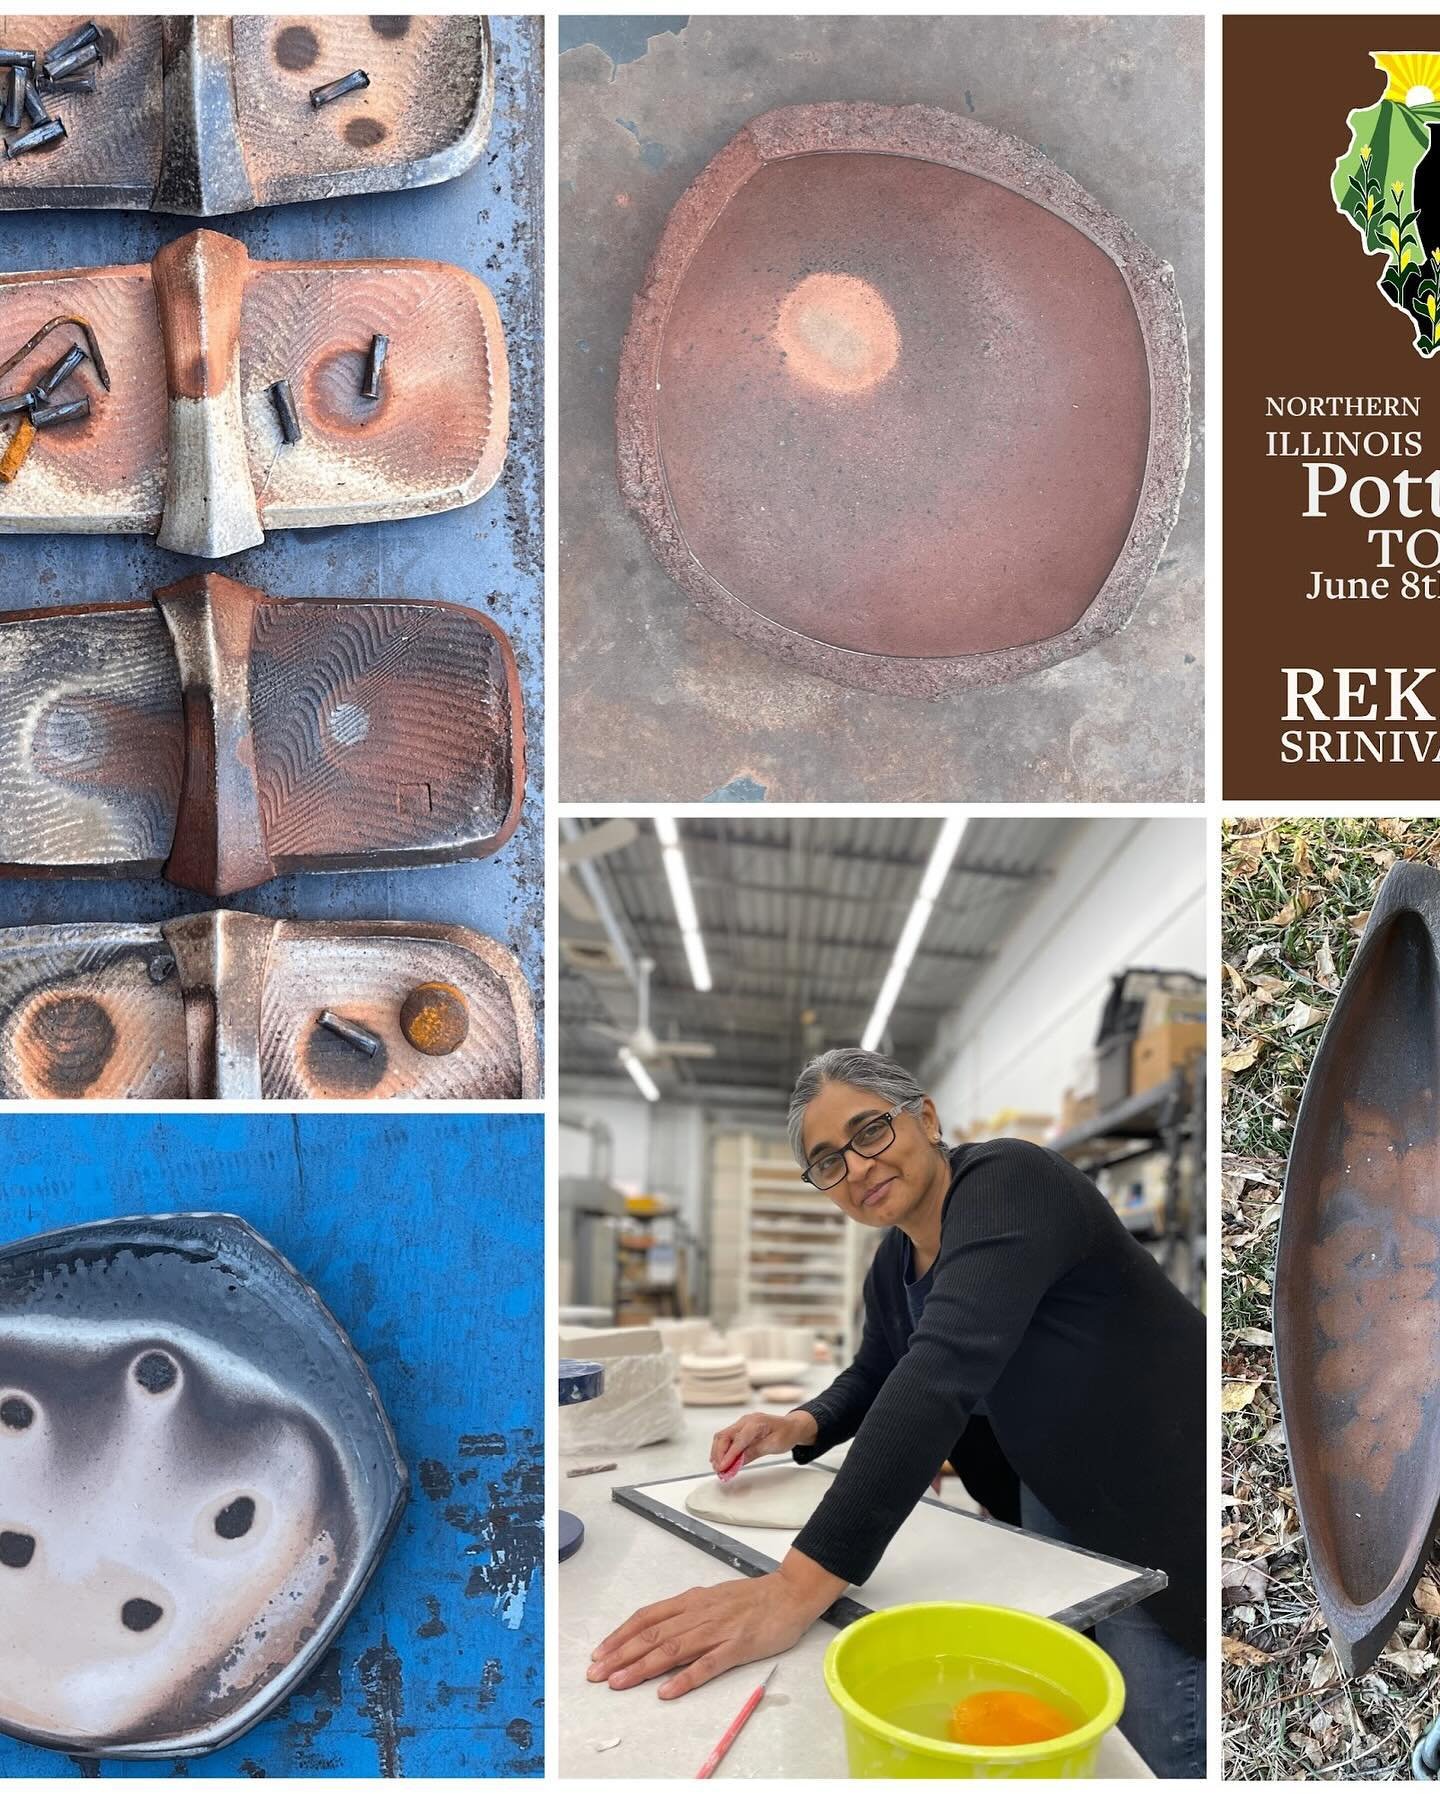 I am happy to welcome @rekha_srinivasan back to Forest Park this year.  Her work is both functional and sculptural with the warm, natural surfaces from wood firing.  I am looking forward to seeing what she will bring this year!  #potterytour #pottery